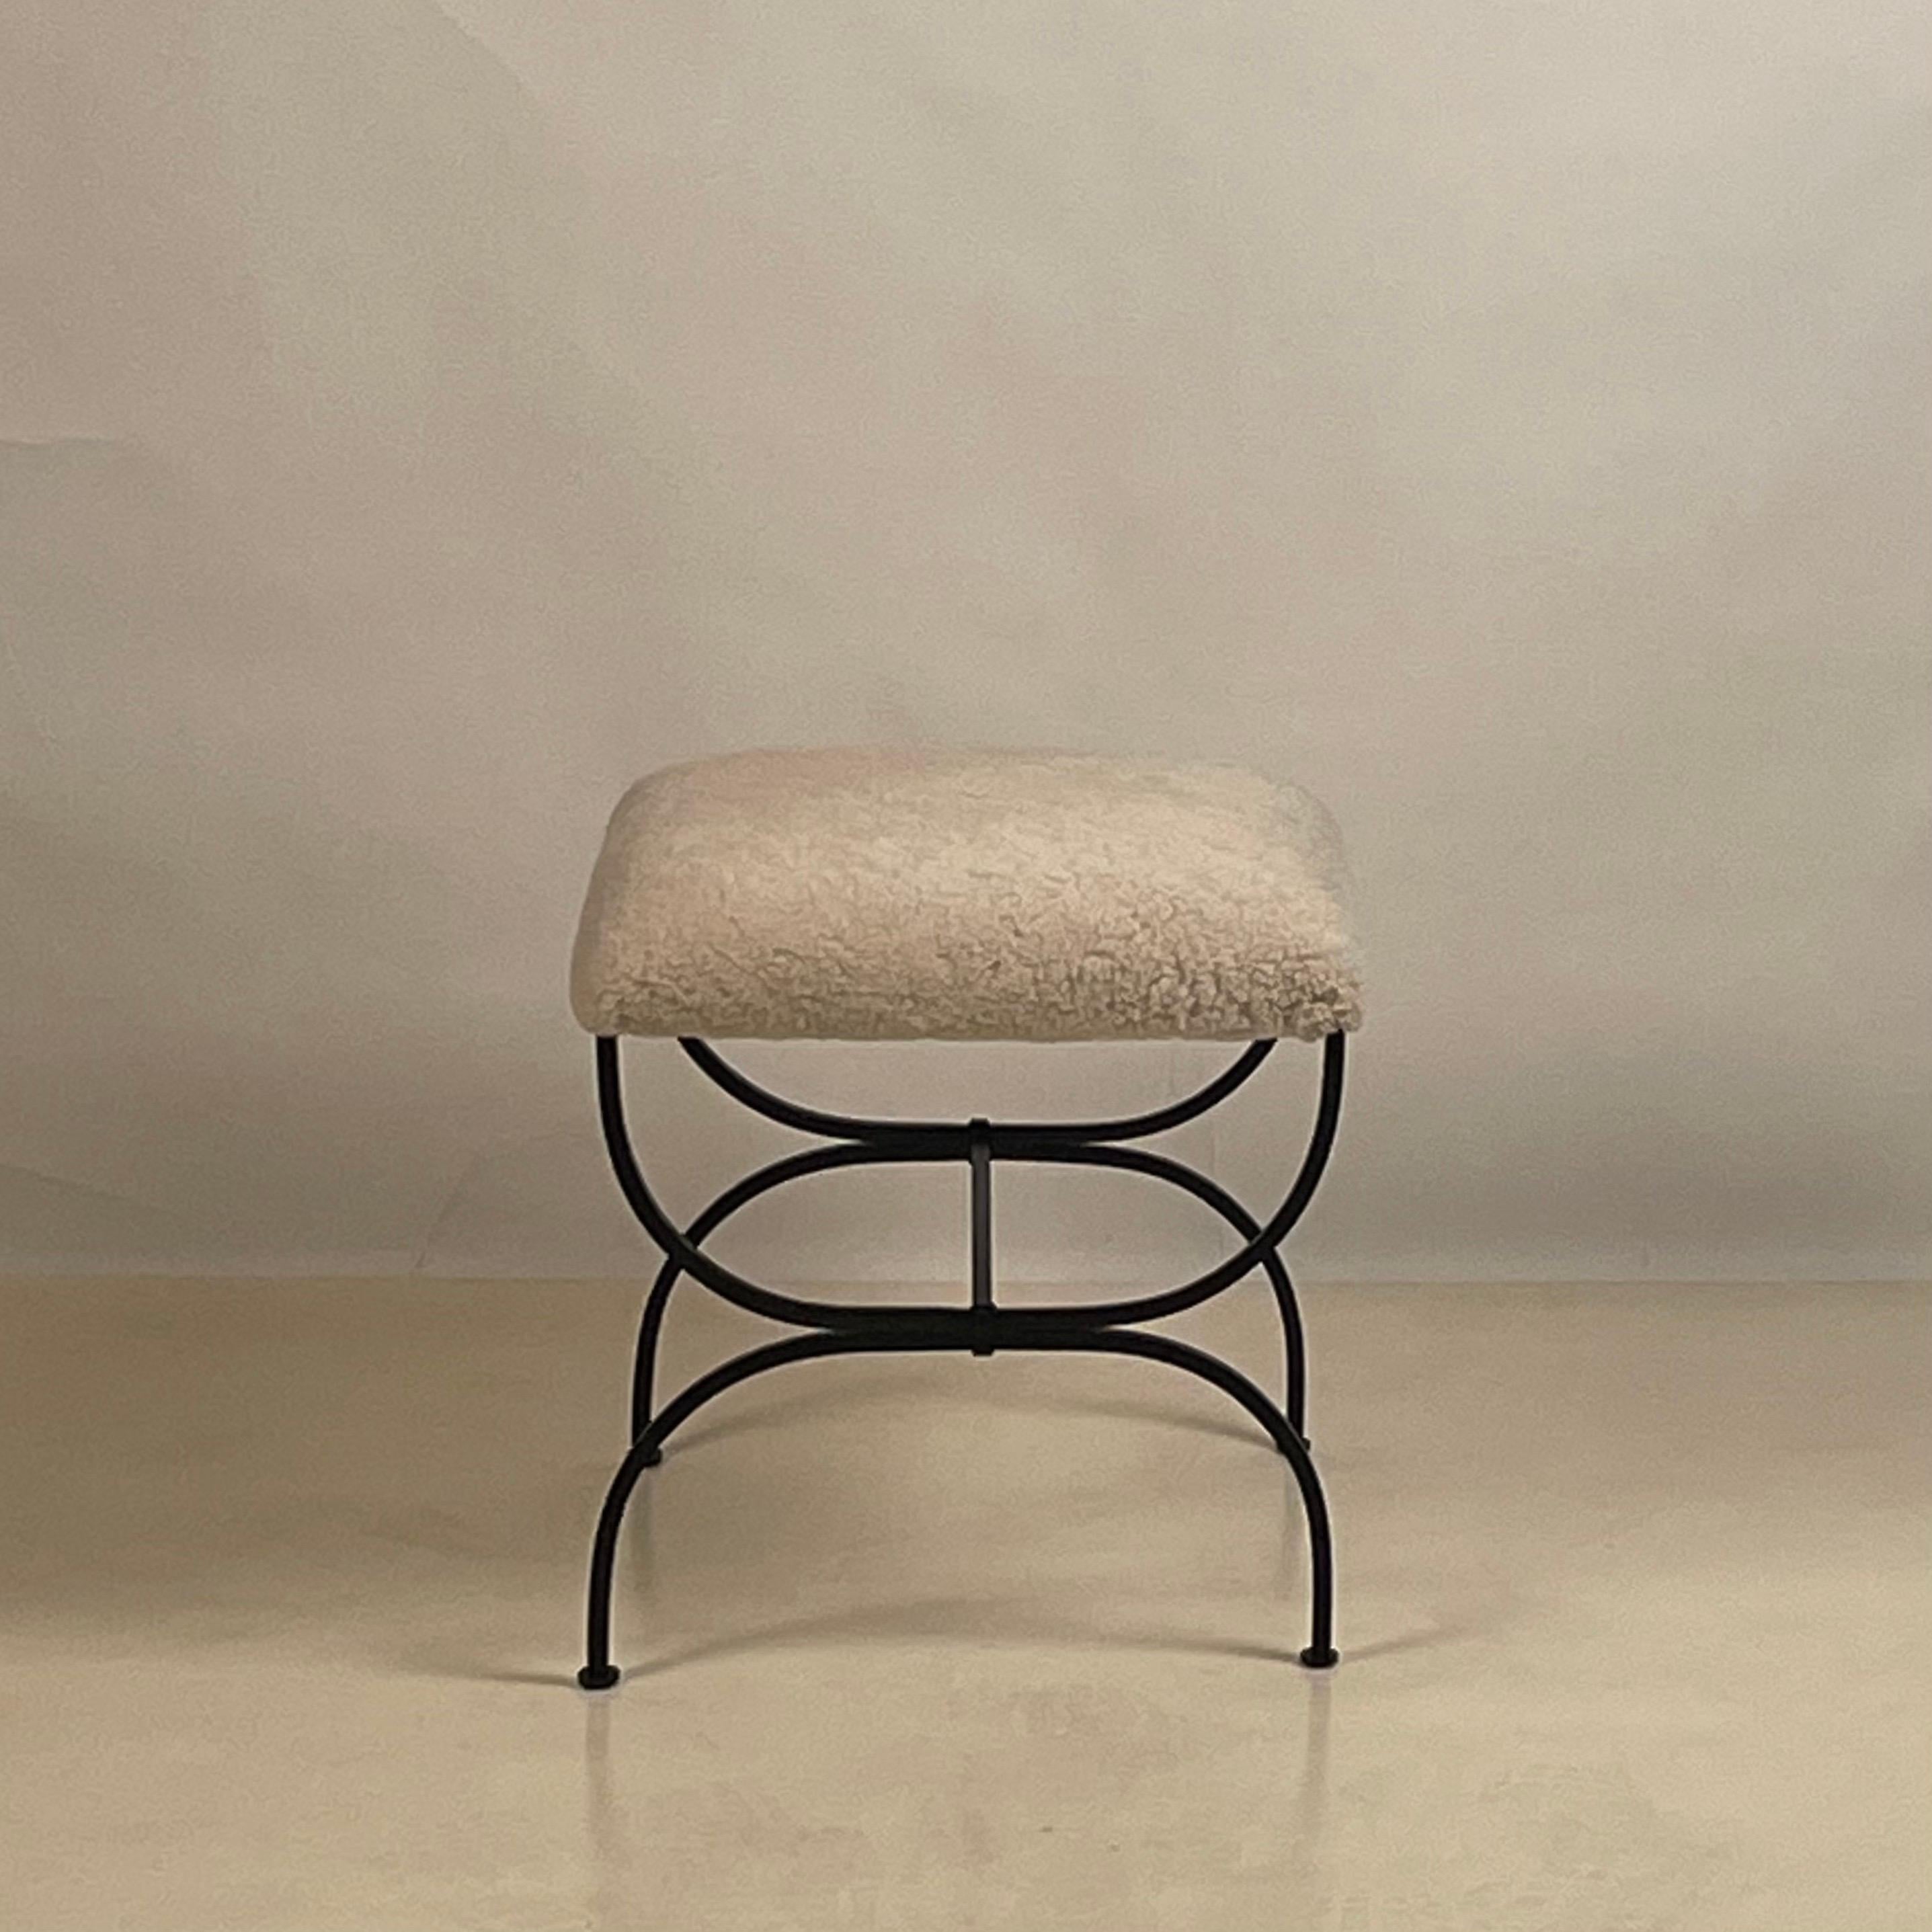 Shearling 'Strapontin' stool by Design Frères.

Chic and understated.